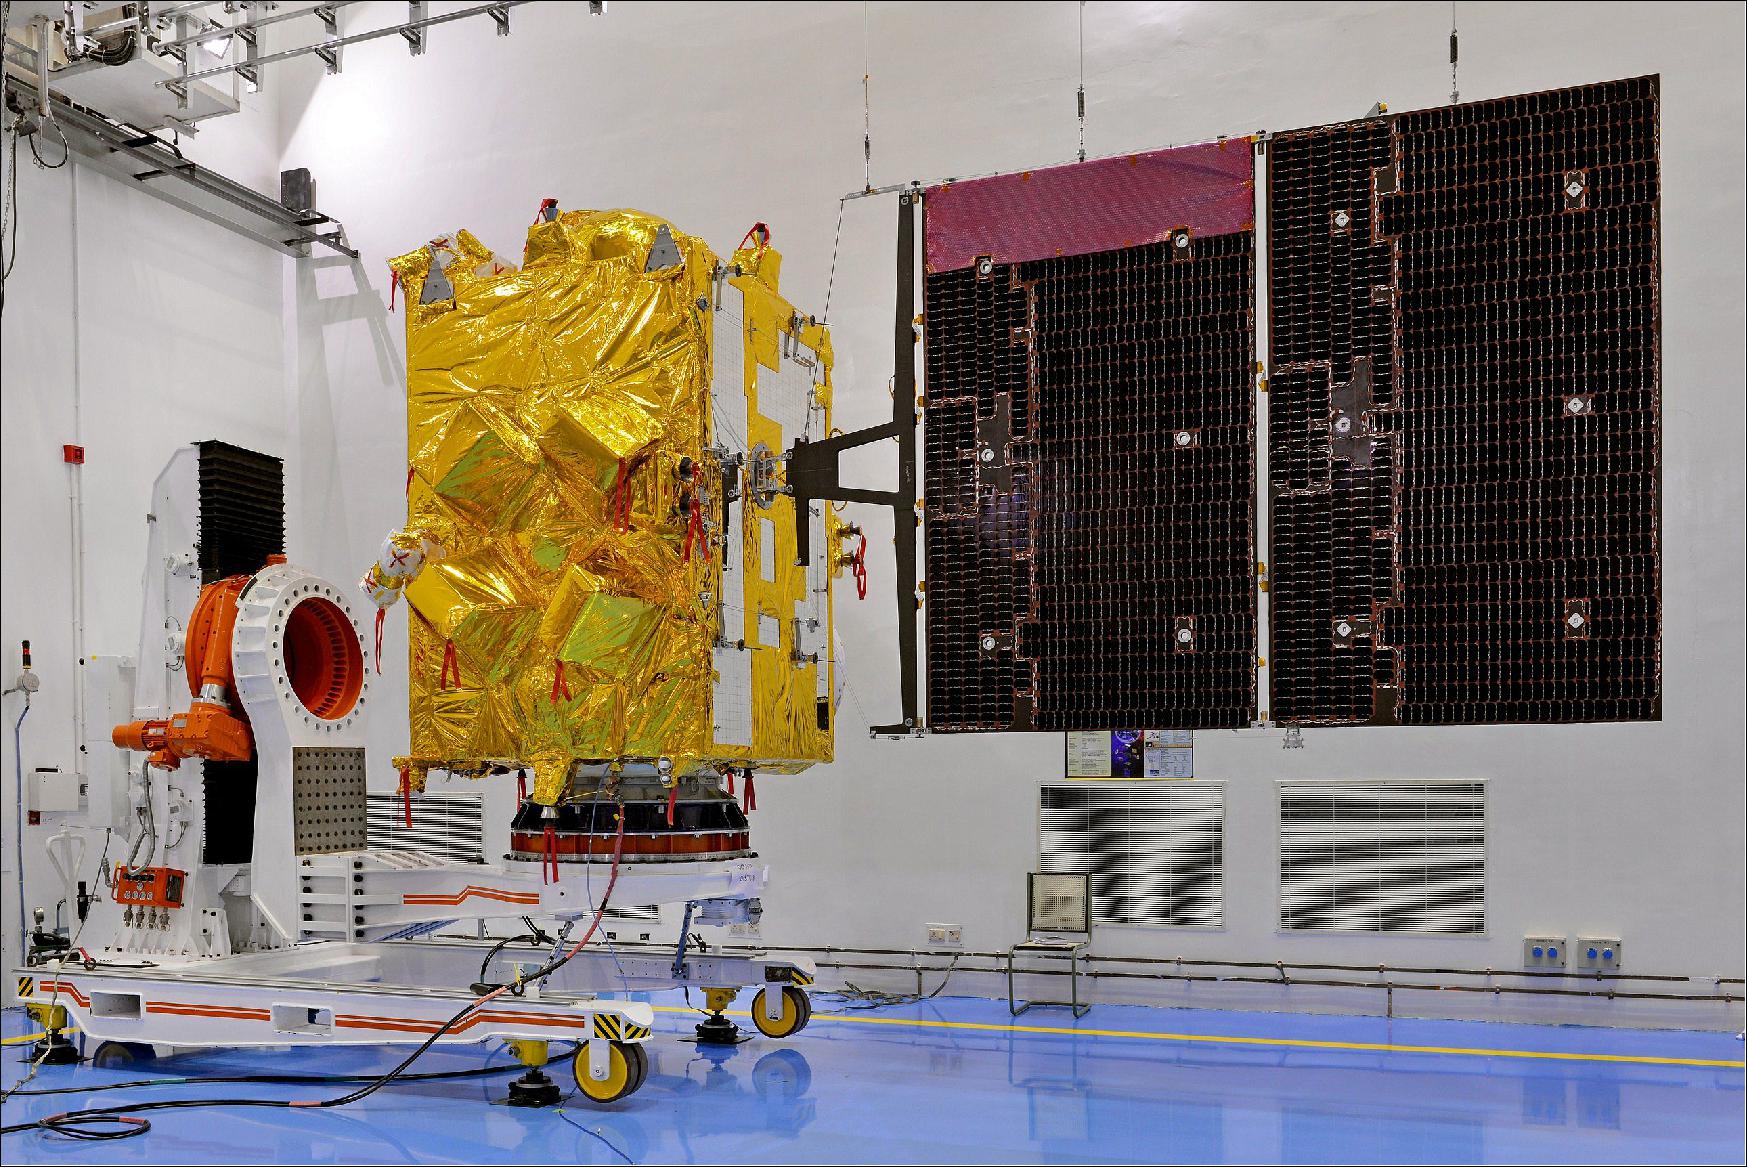 Figure 1: Image of the INSAT-3DR spacecraft in the clean room at ISRO with the solar panel deployed (image credit: ISRO) 2)